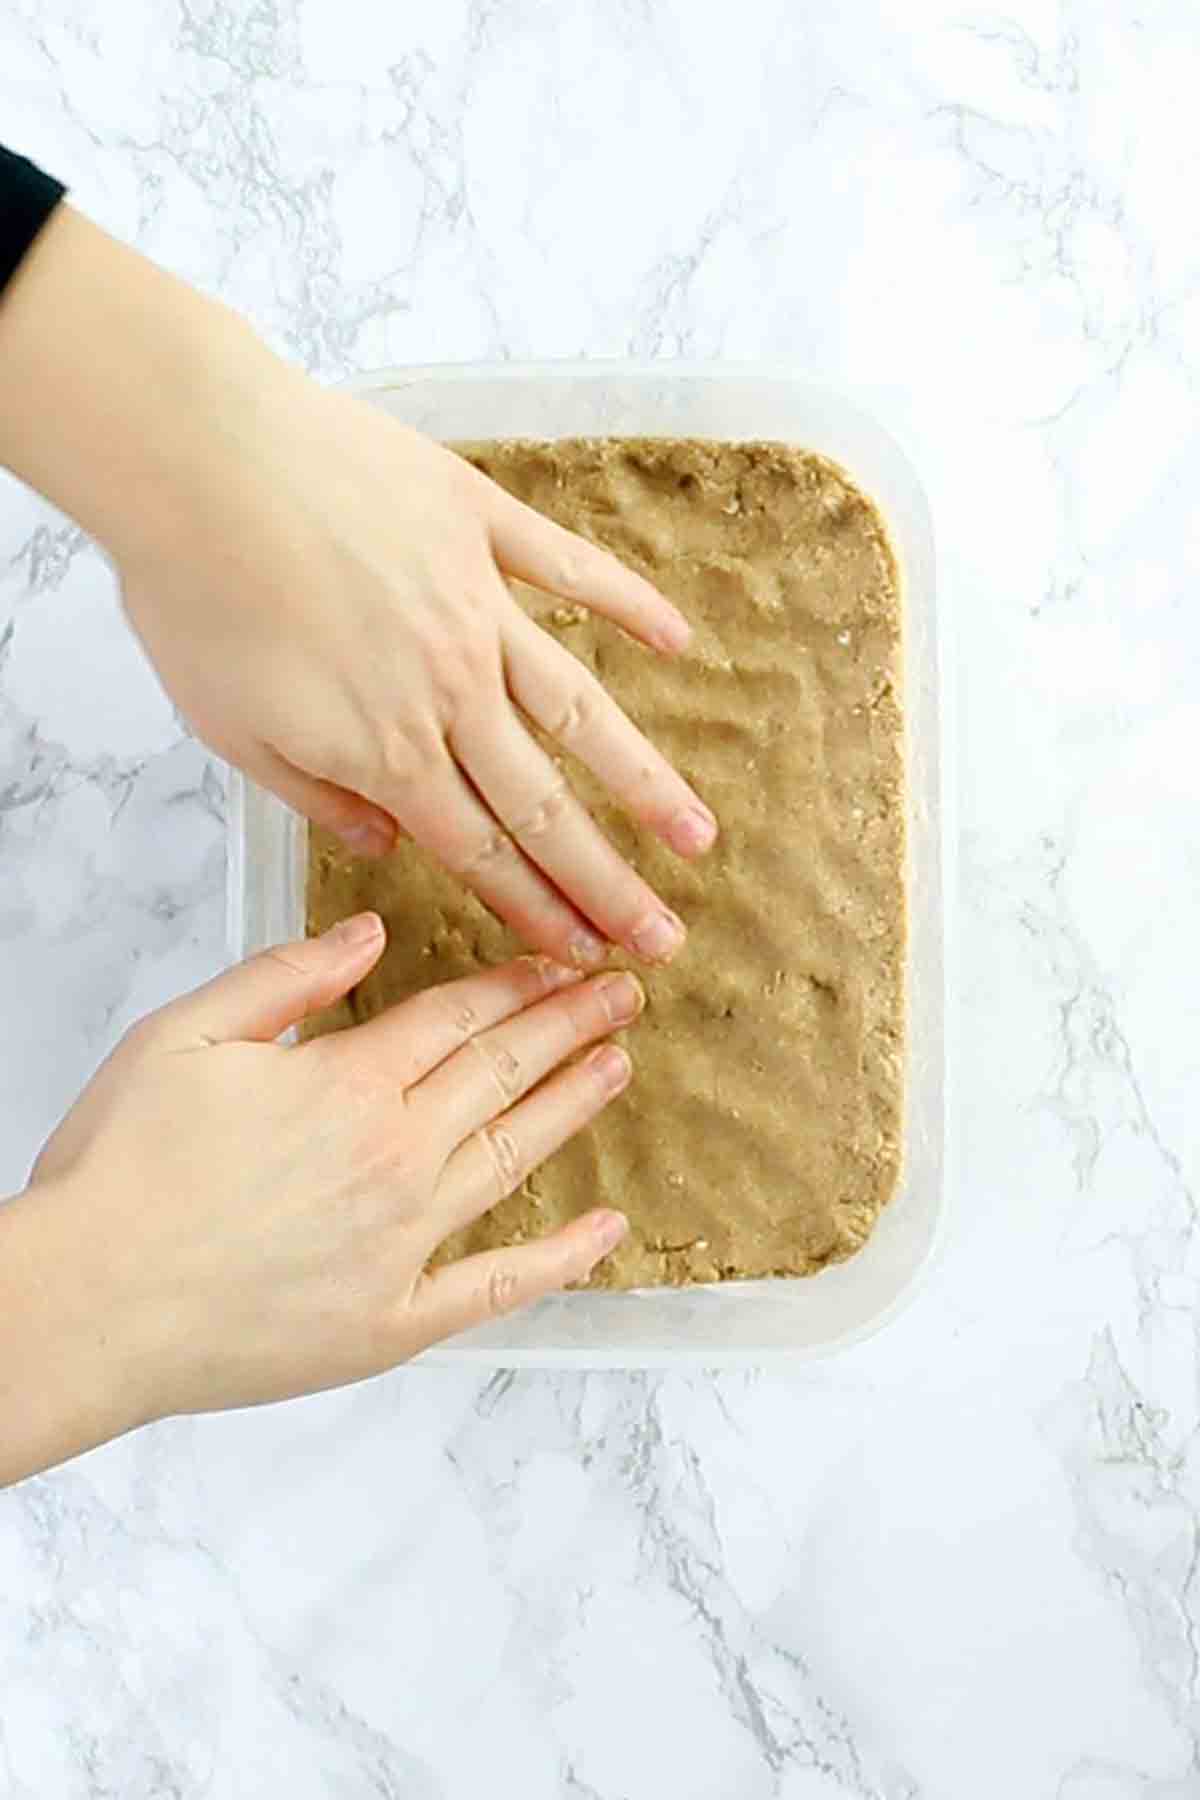 Pressing The Dough Into A Container